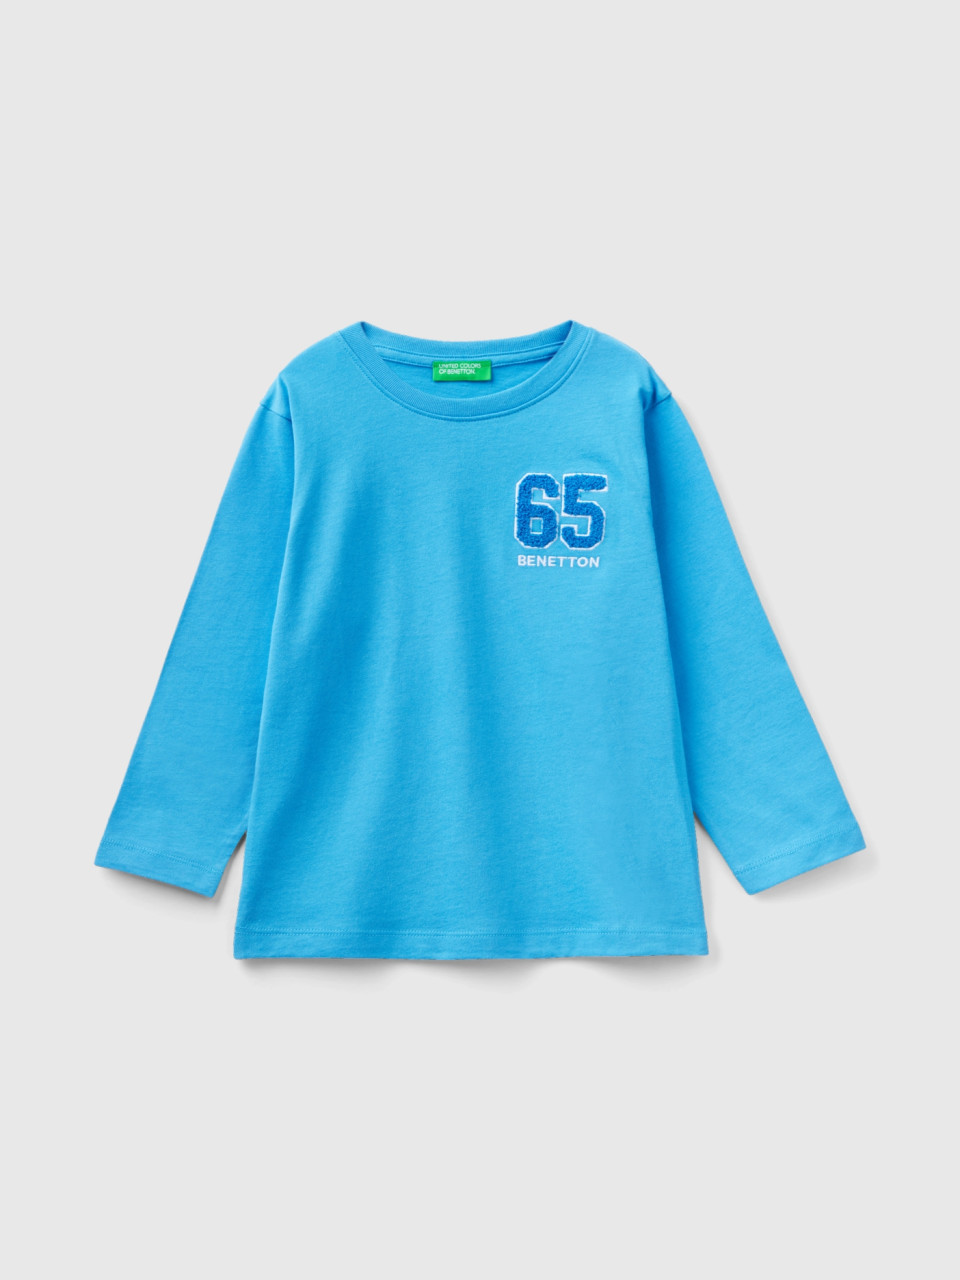 Benetton, T-shirt With Terry Embroidery, Blue, Kids